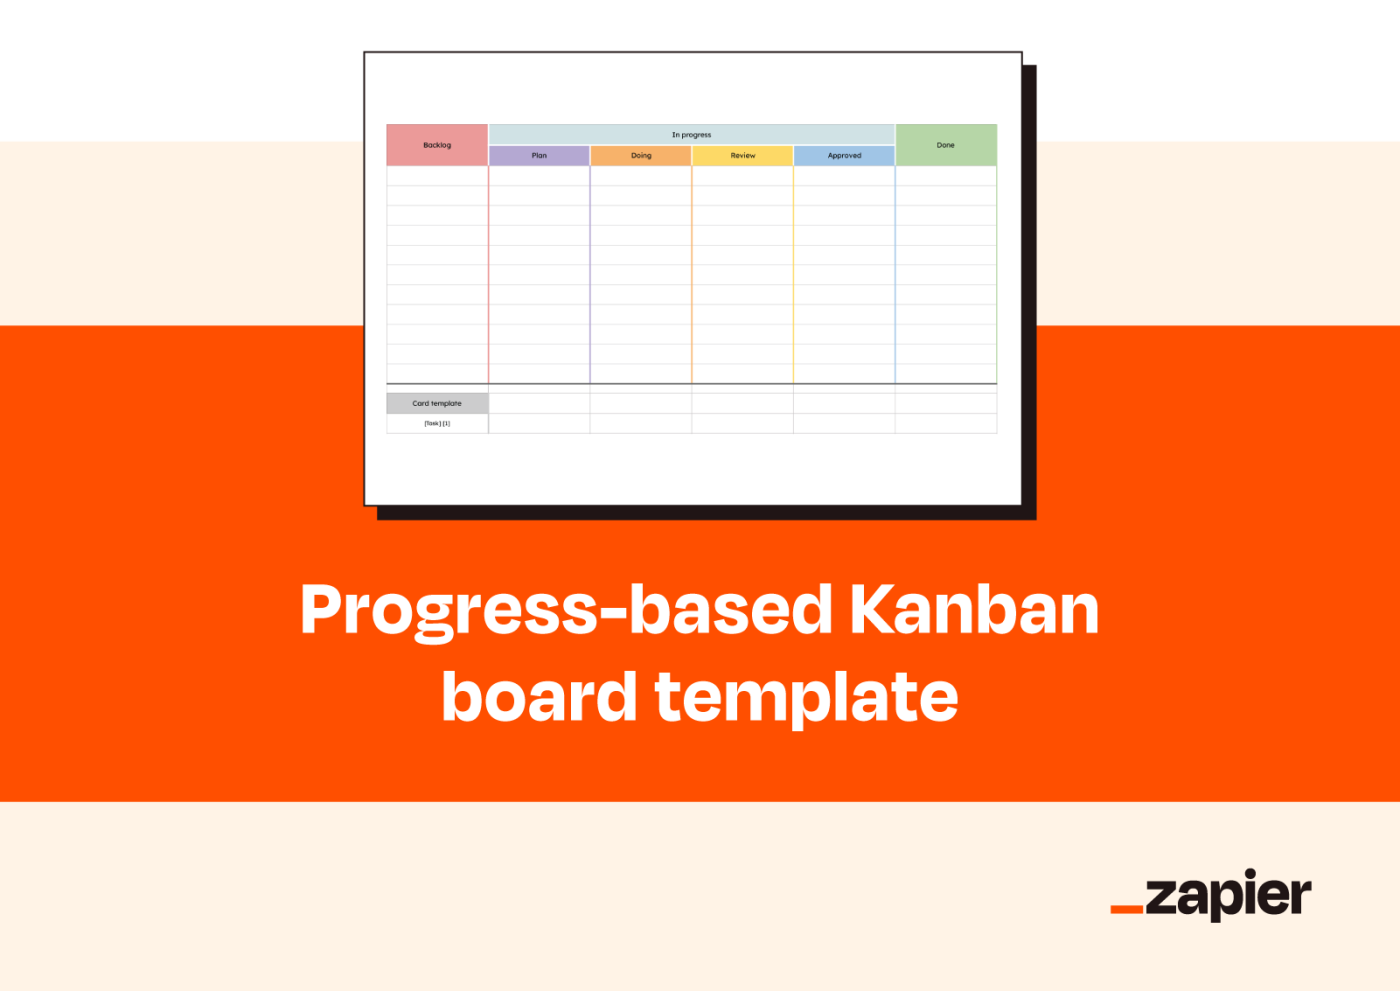 Graphic reading Progress-based Kanban board template with screenshot of the template.